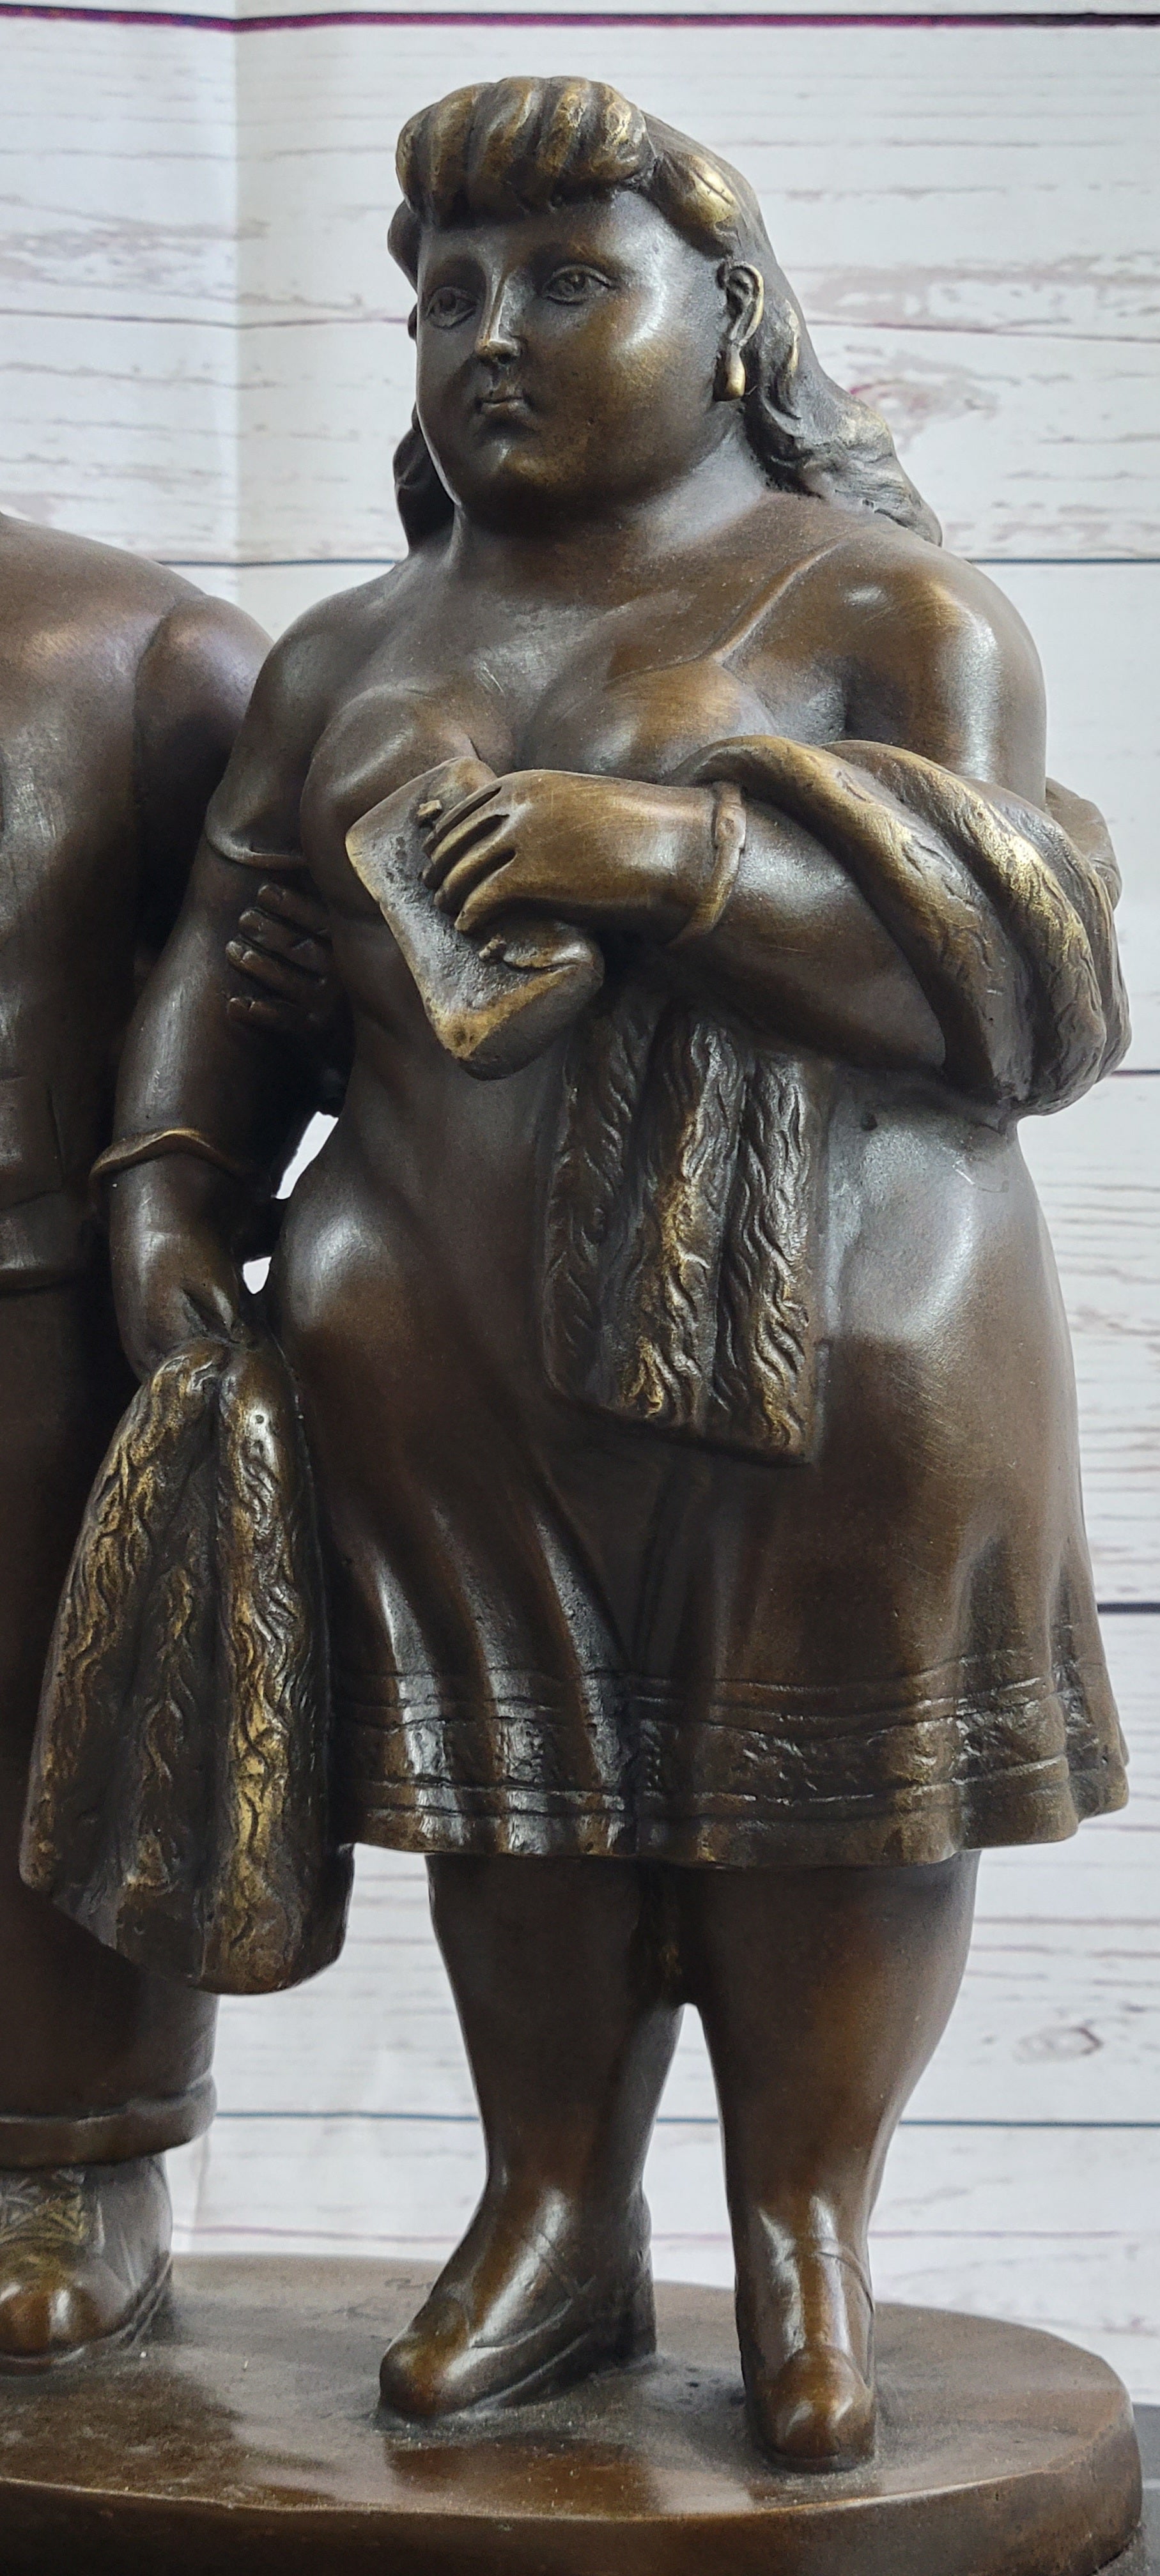 English Couple Bronze Sculpture Museum Quality Classic Artwork by Botero Figurine